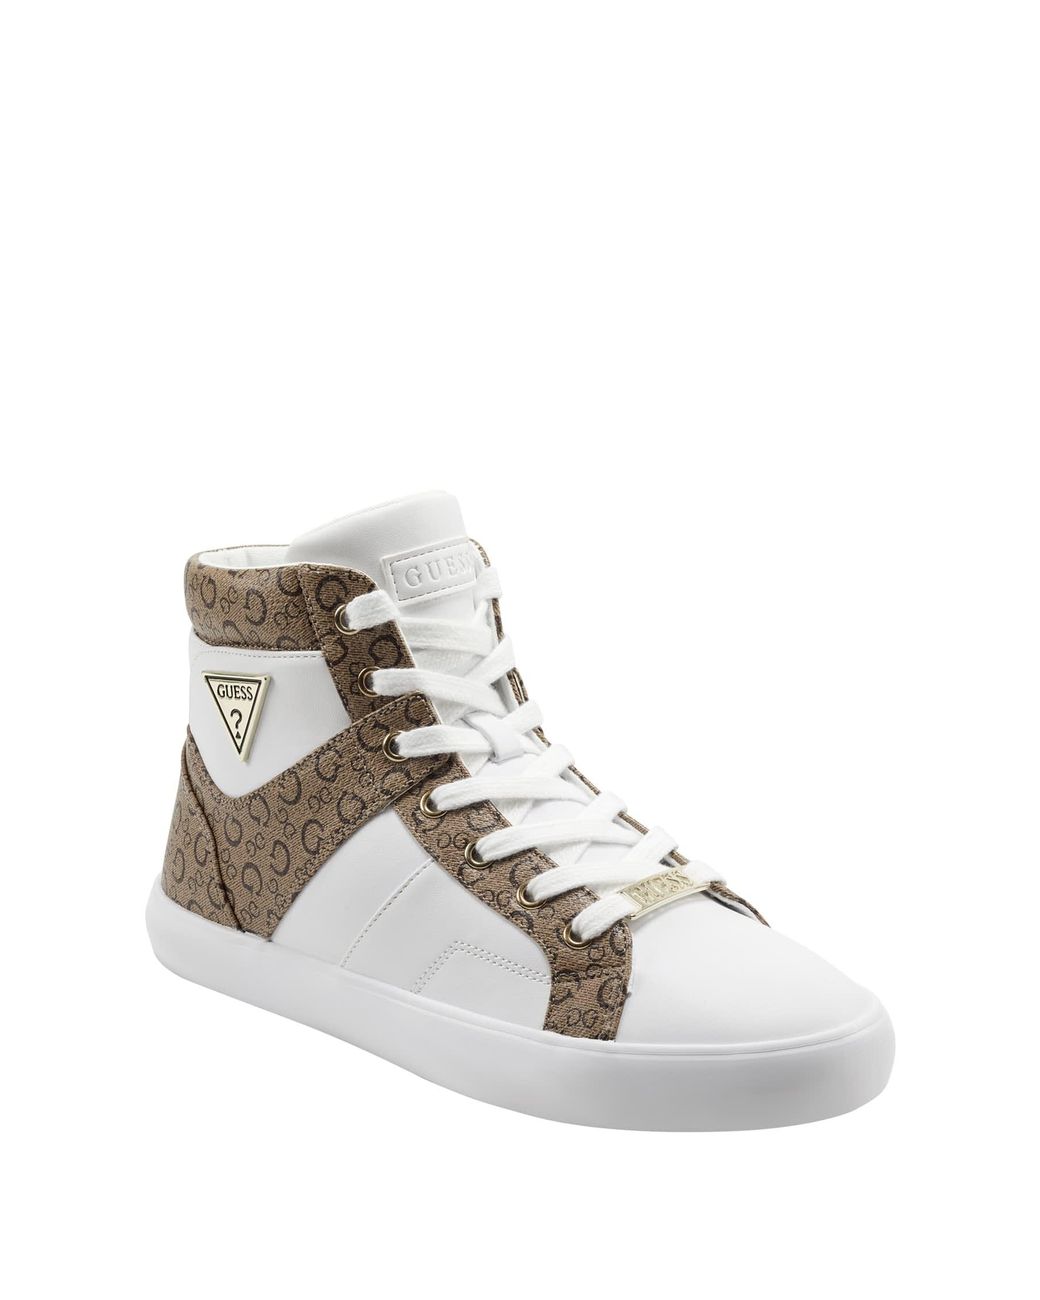 Guess Factory Mariam High-top Sneakers in White | Lyst